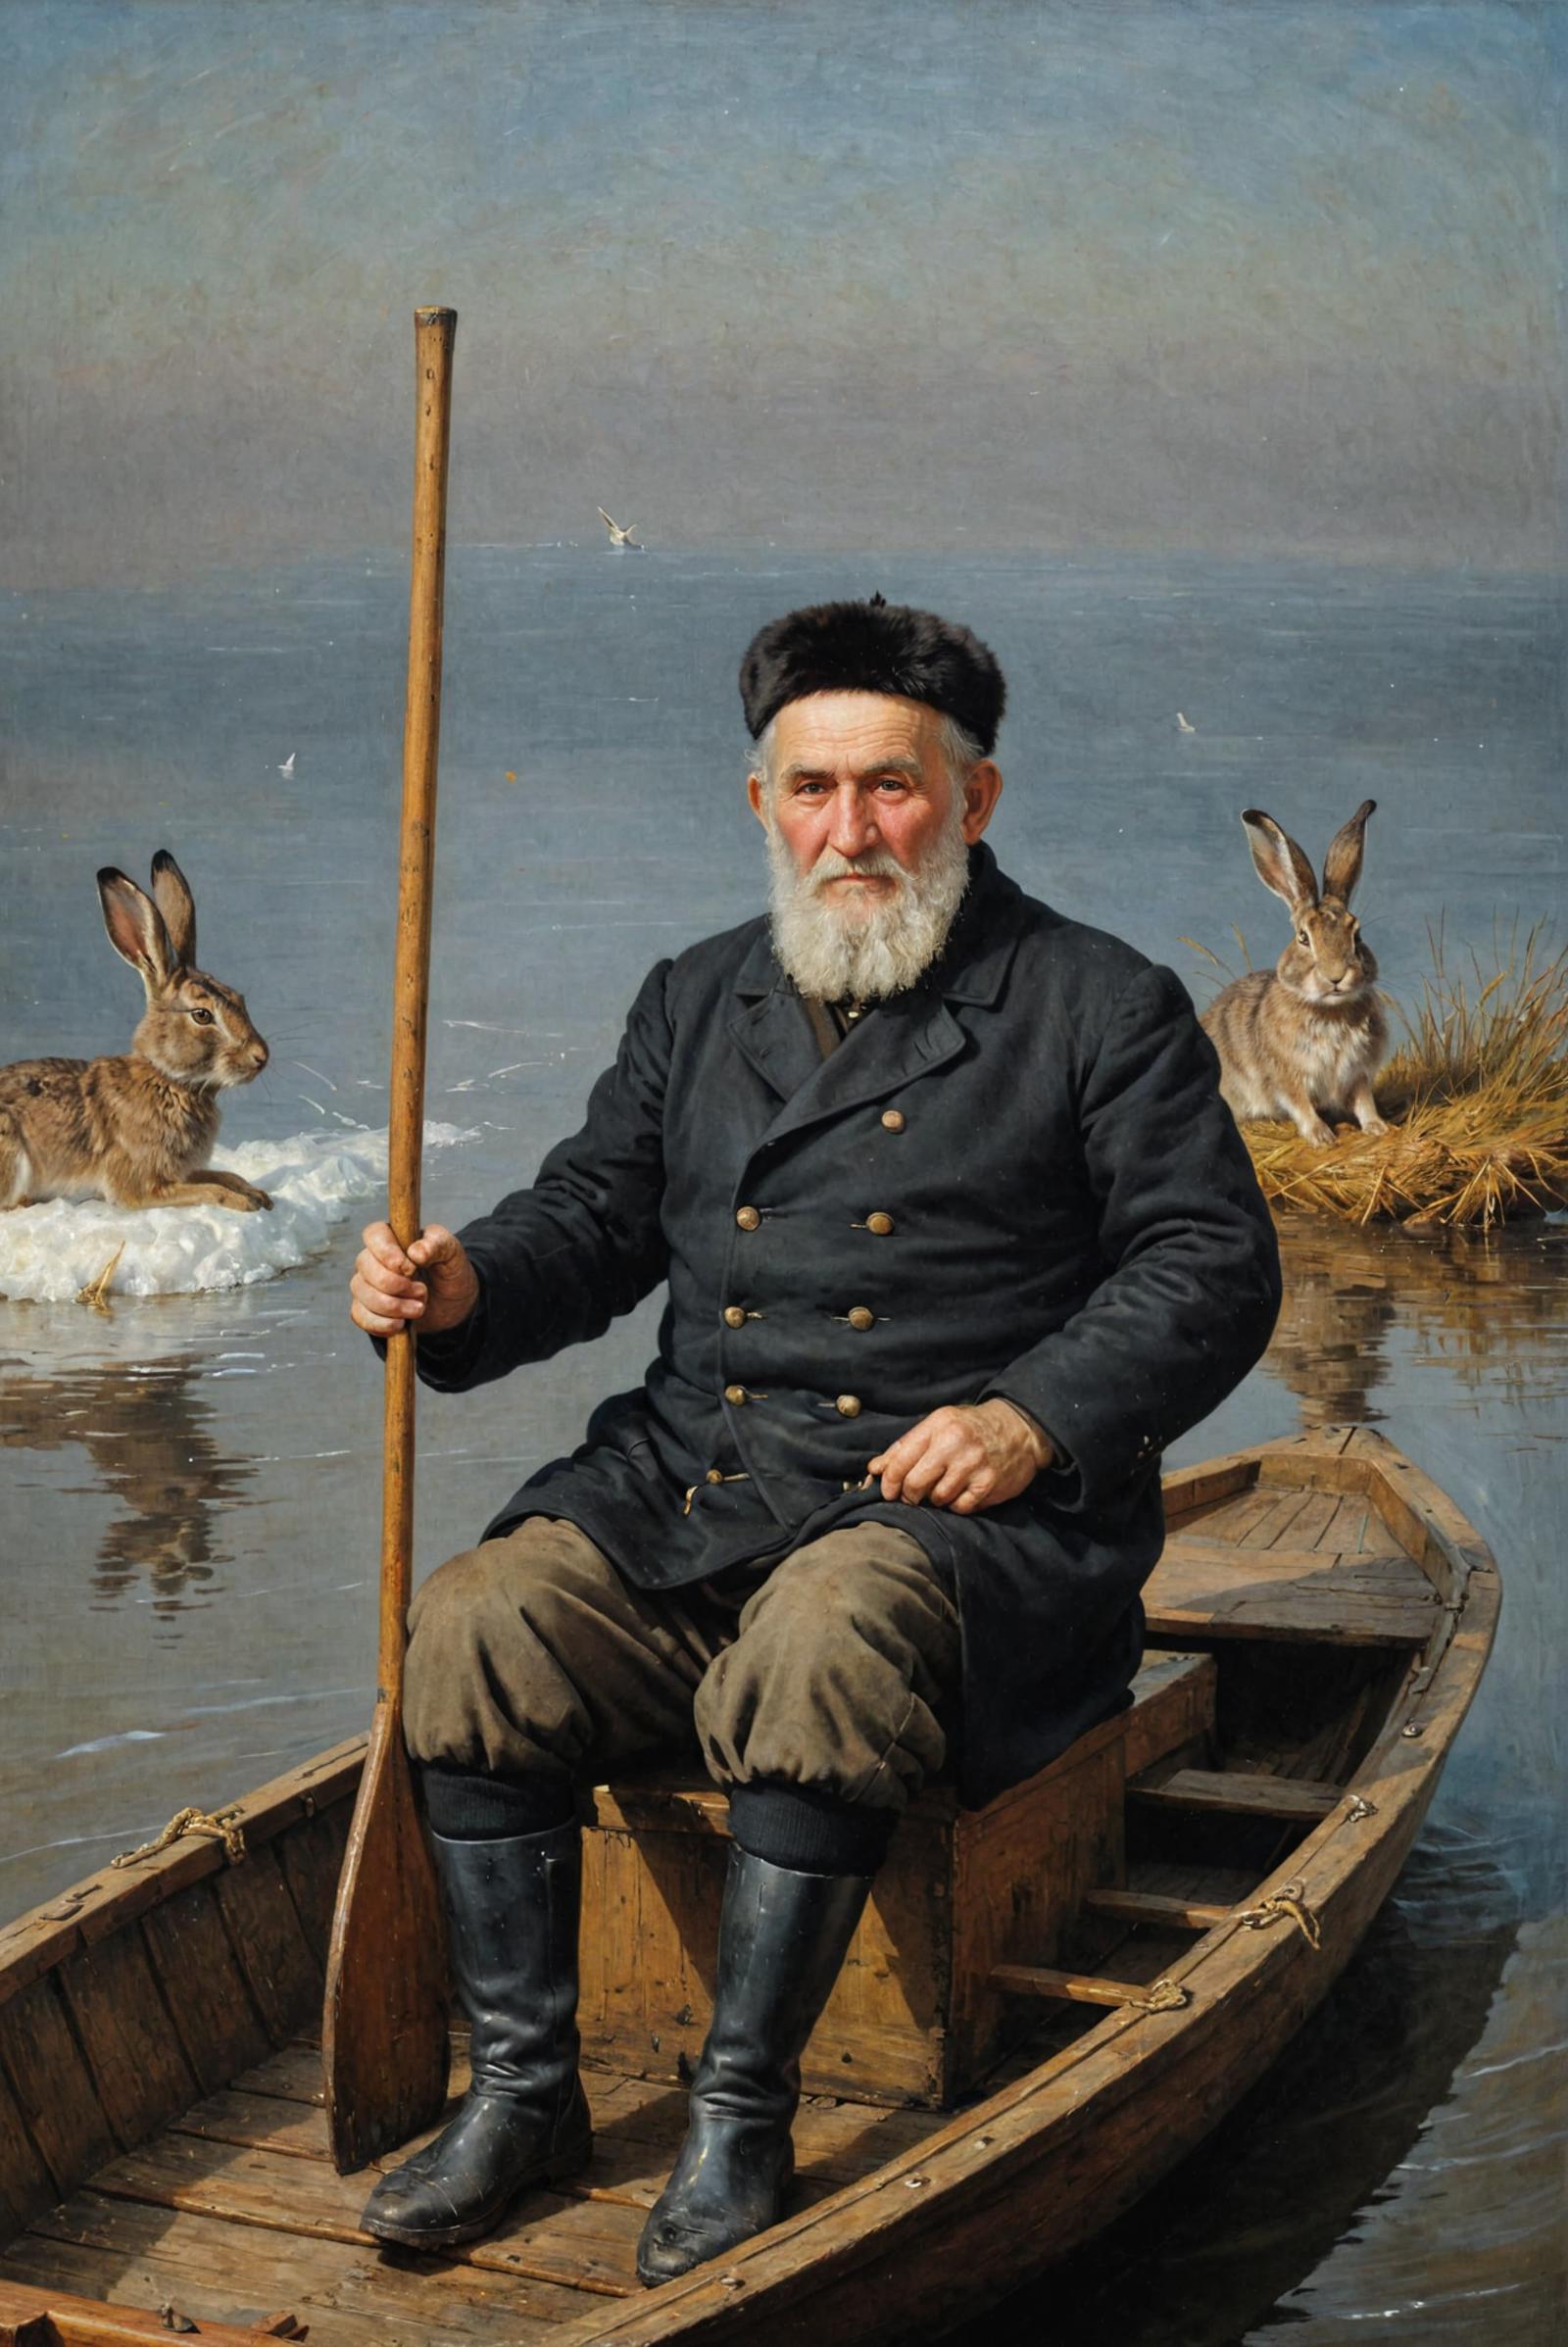 A man in a boat with a stick, surrounded by rabbits.